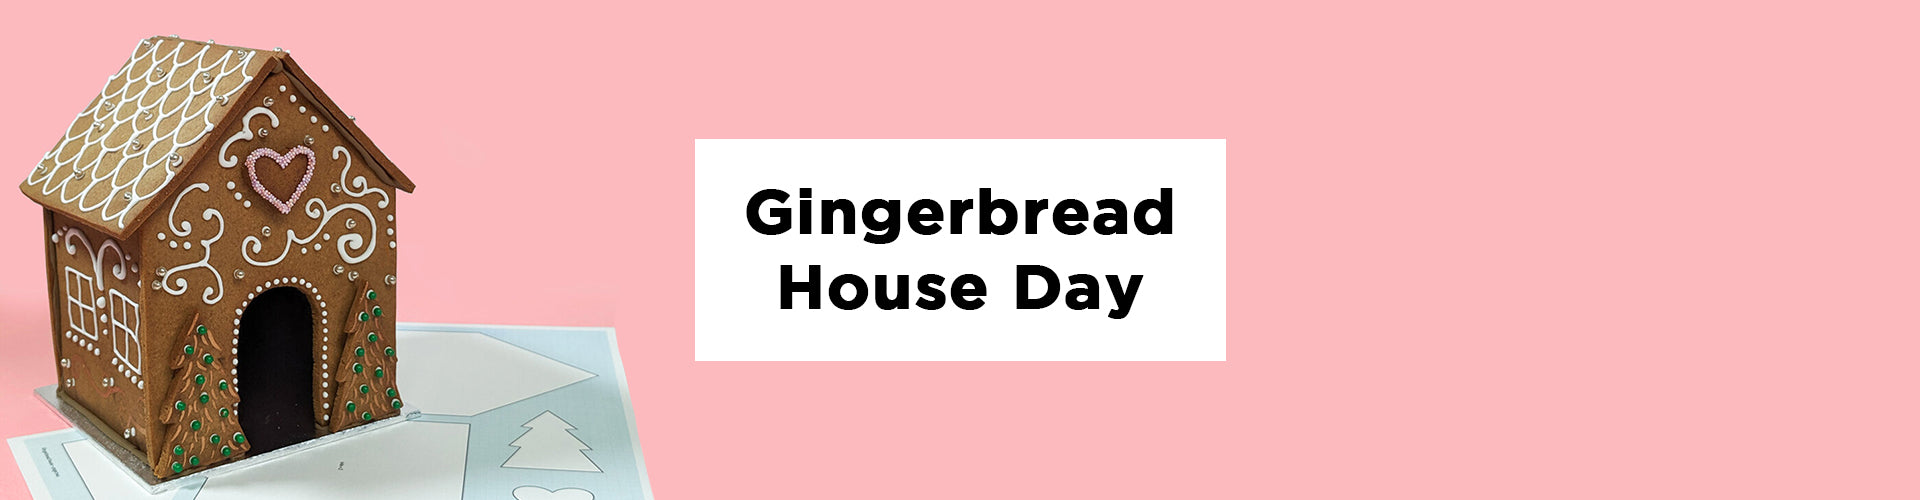 A Gingerbread House tutorial with Maid of Gingerbread